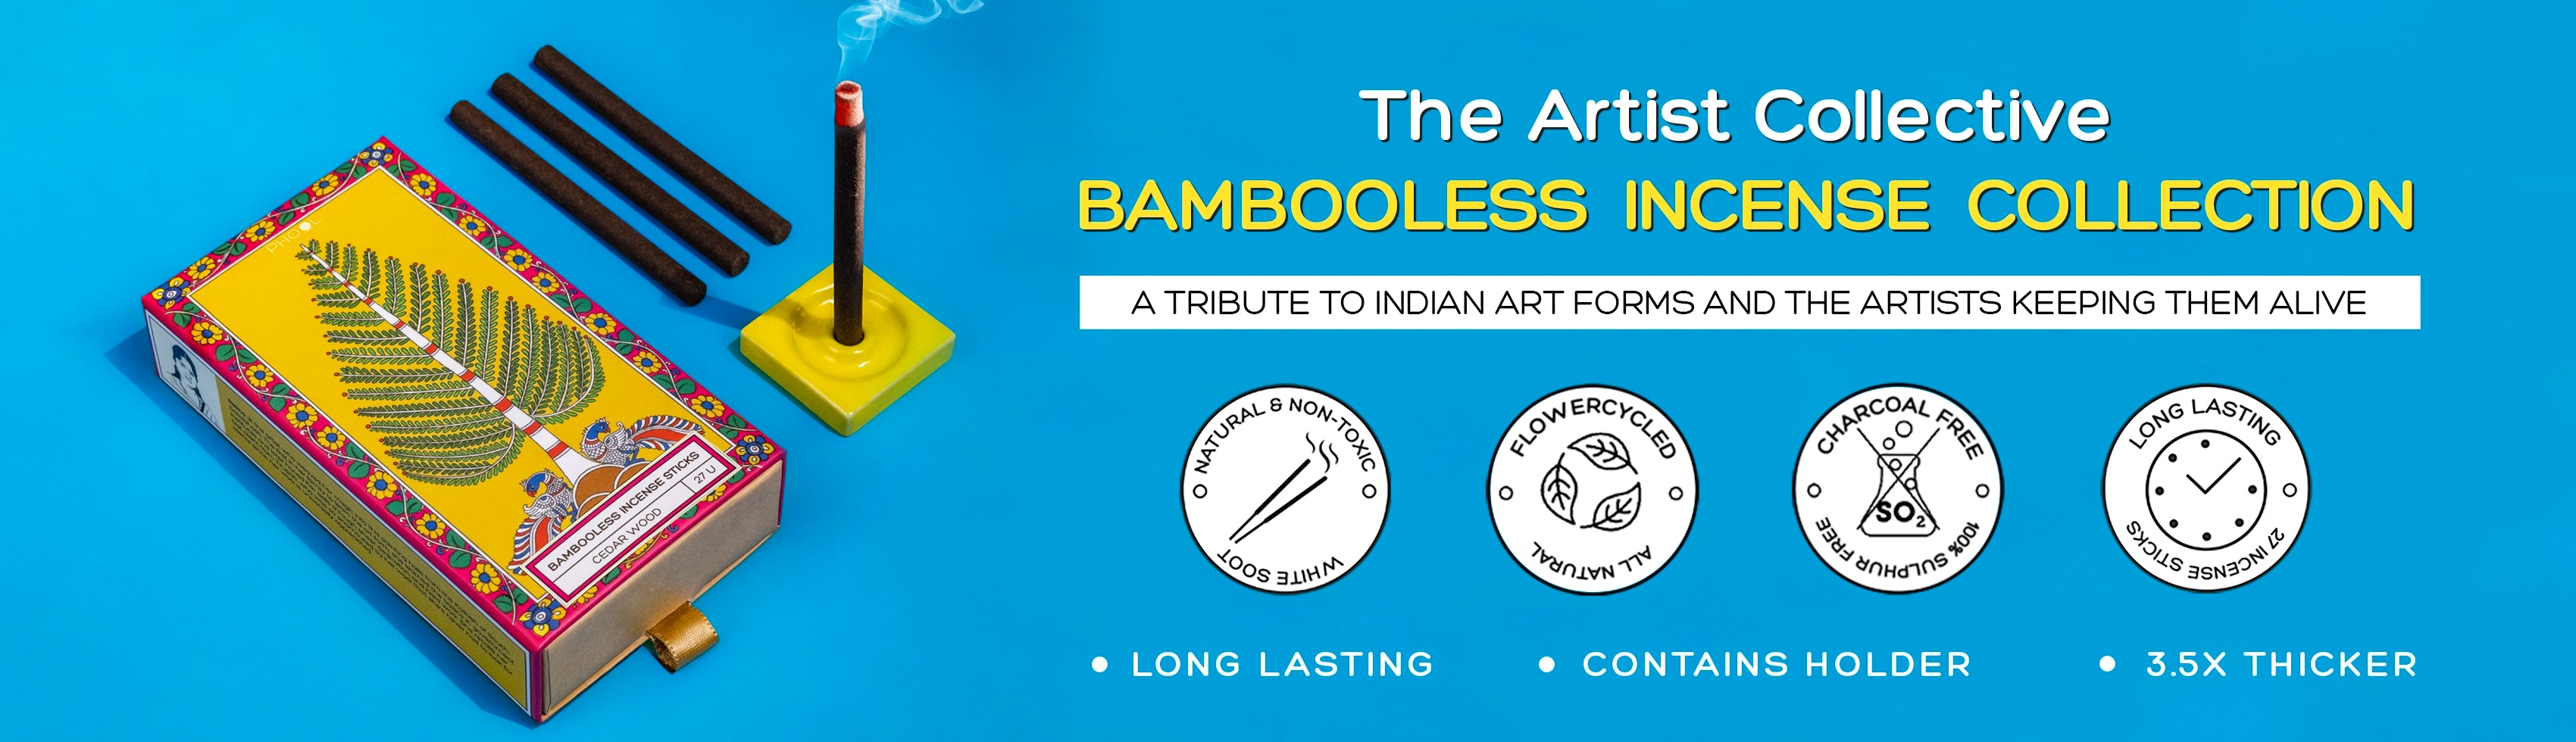 Bambooless Incense Sticks collection